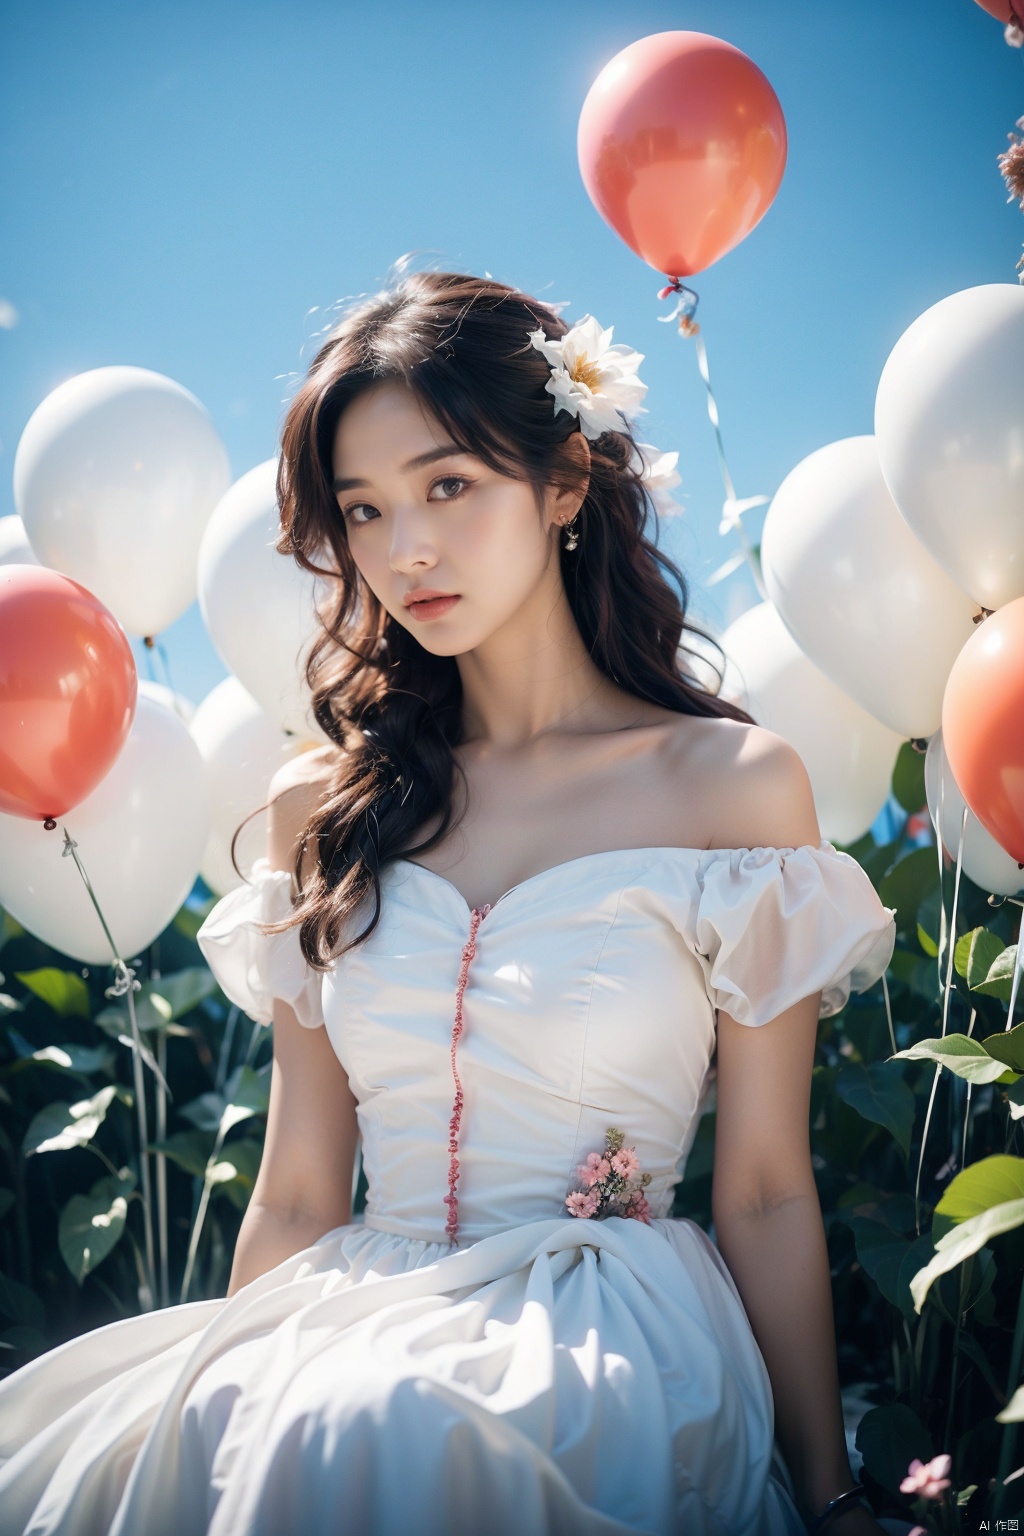 1 girl, with fluffy rainbow colored long hair, messy hair, exquisite facial features, perfect facial features, exquisite skin, wearing a white dress, slender waist, ethereal, retro photography, sitting in balloons and flower bushes, created by Kawaguchi Linzi Art, in a natural posture, holiday style, youthful vitality, calm expression, flowers in the sky, simulation movies, super details, dreamy LOFI photography, colorful, covering balloons, Flowers and vines. From below, shot on film XT4, realistic, 16k, super detailed

